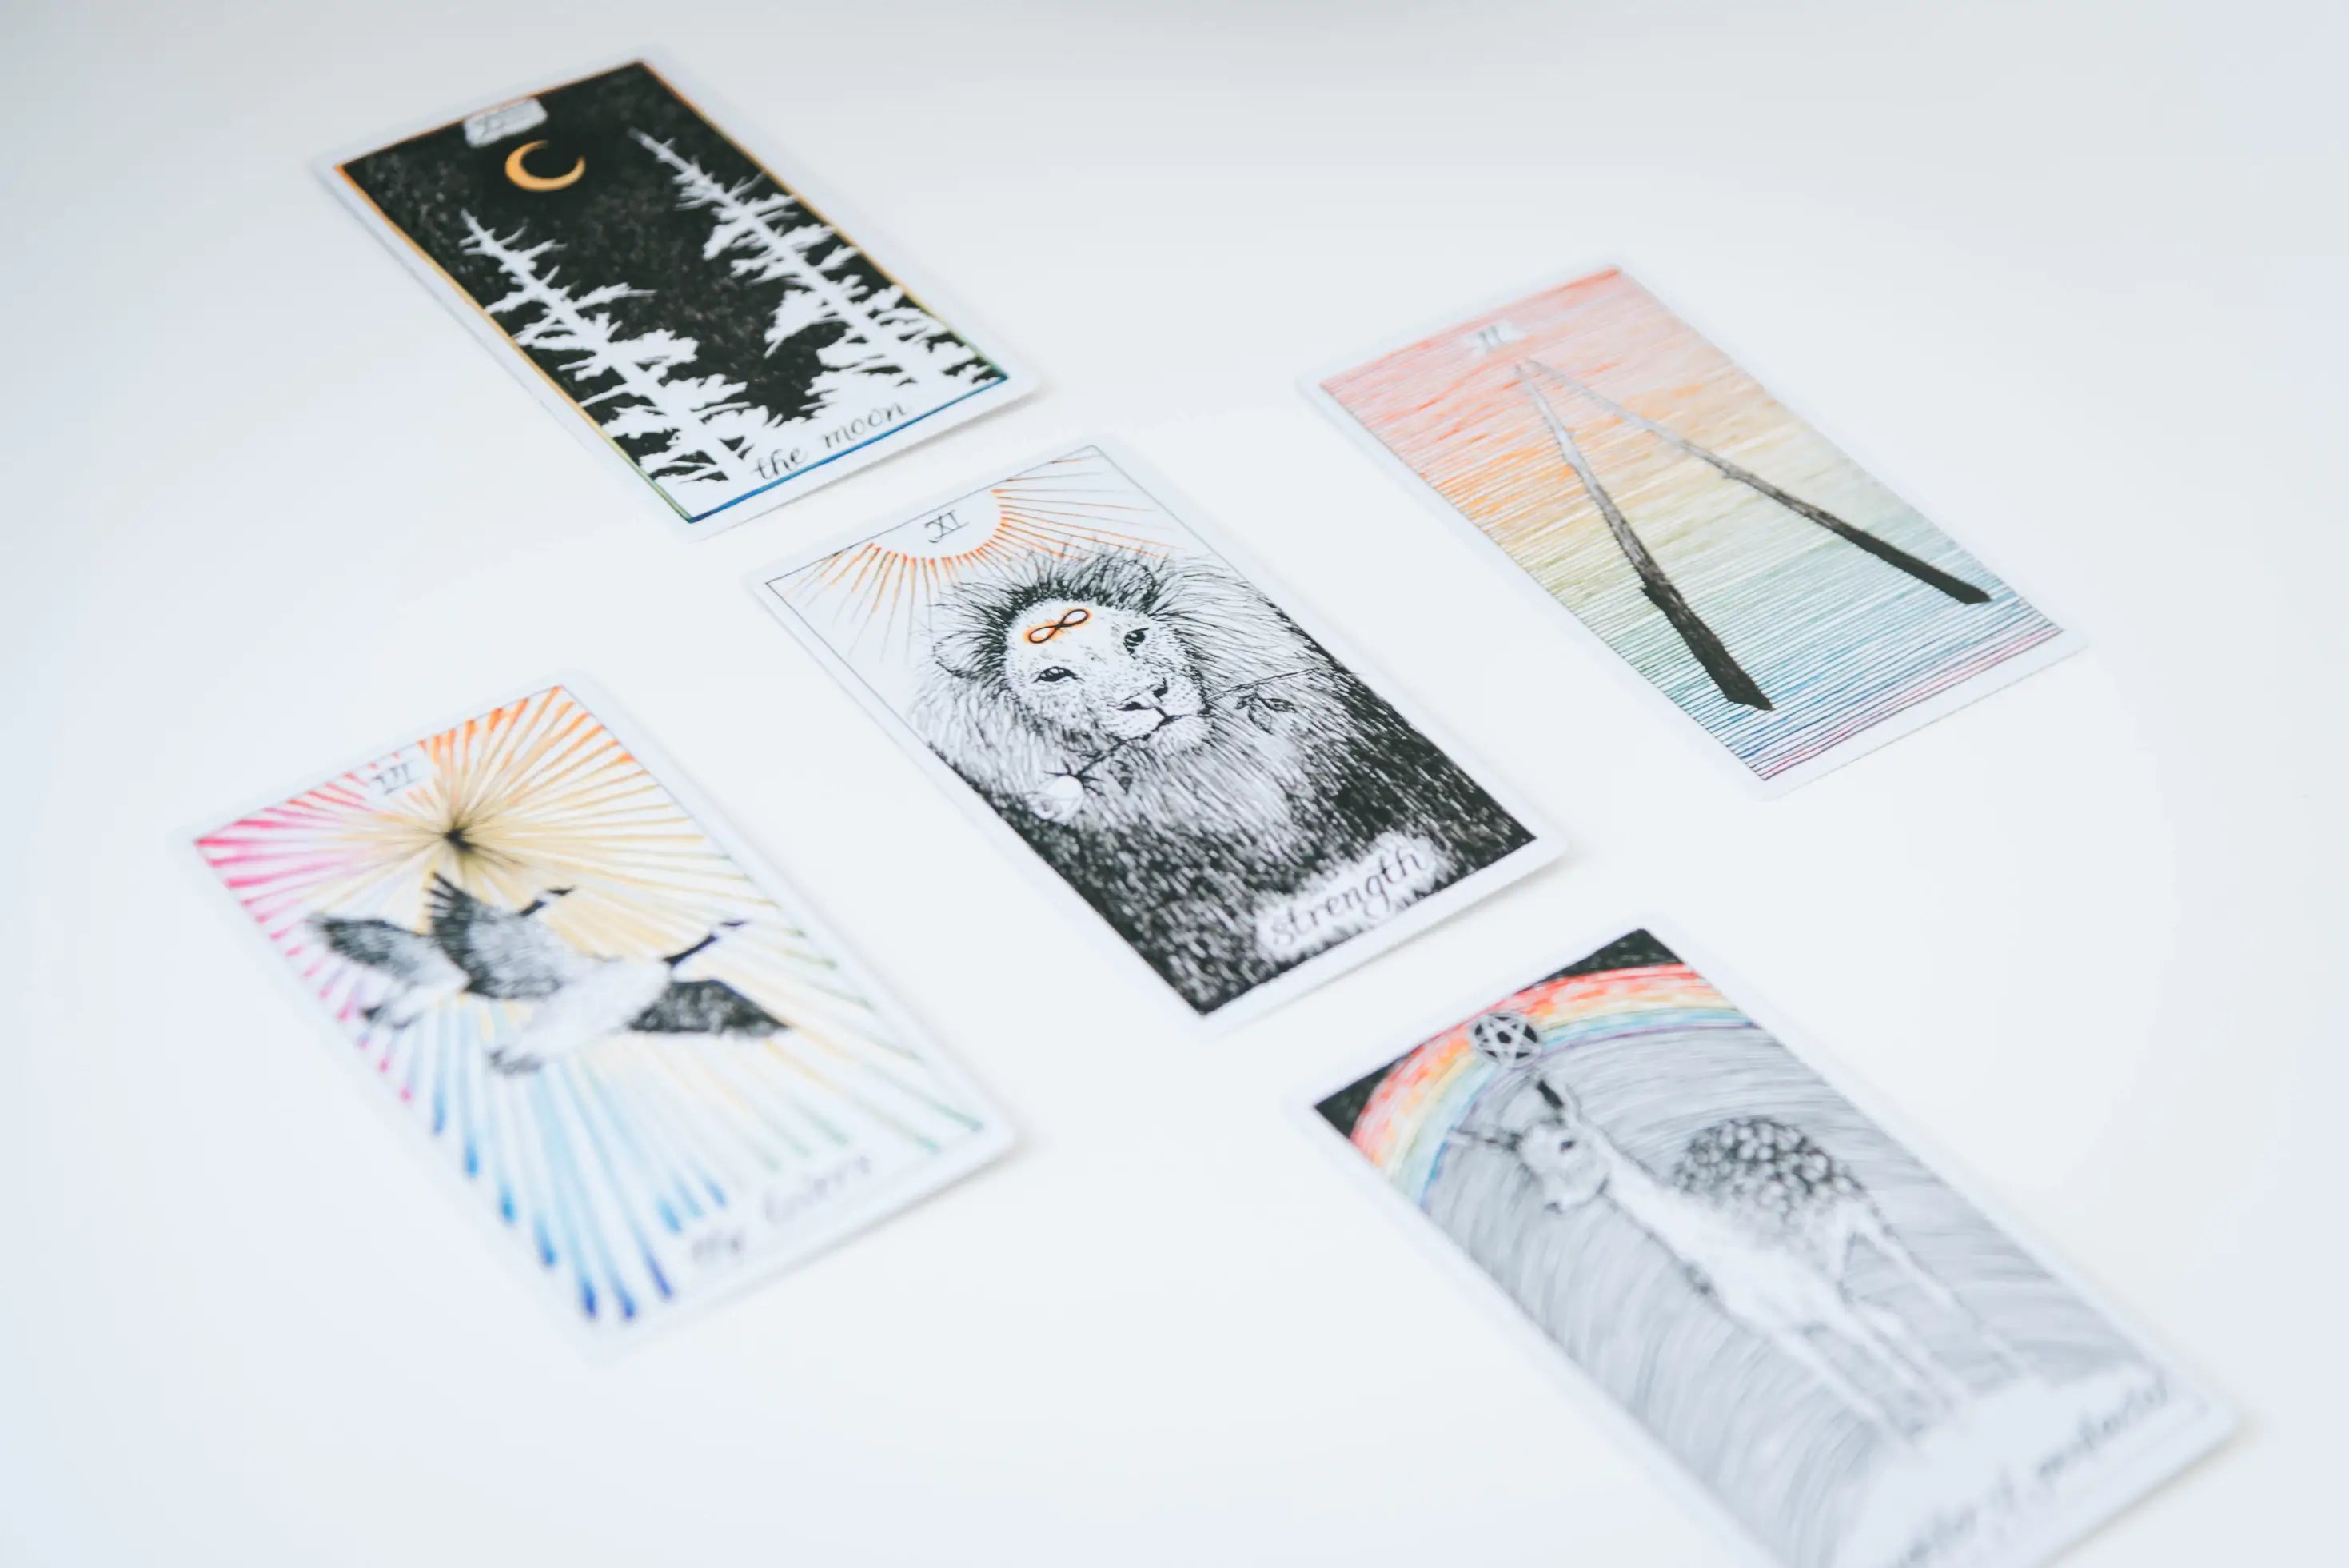 5 tarot cards with hand drawn designs